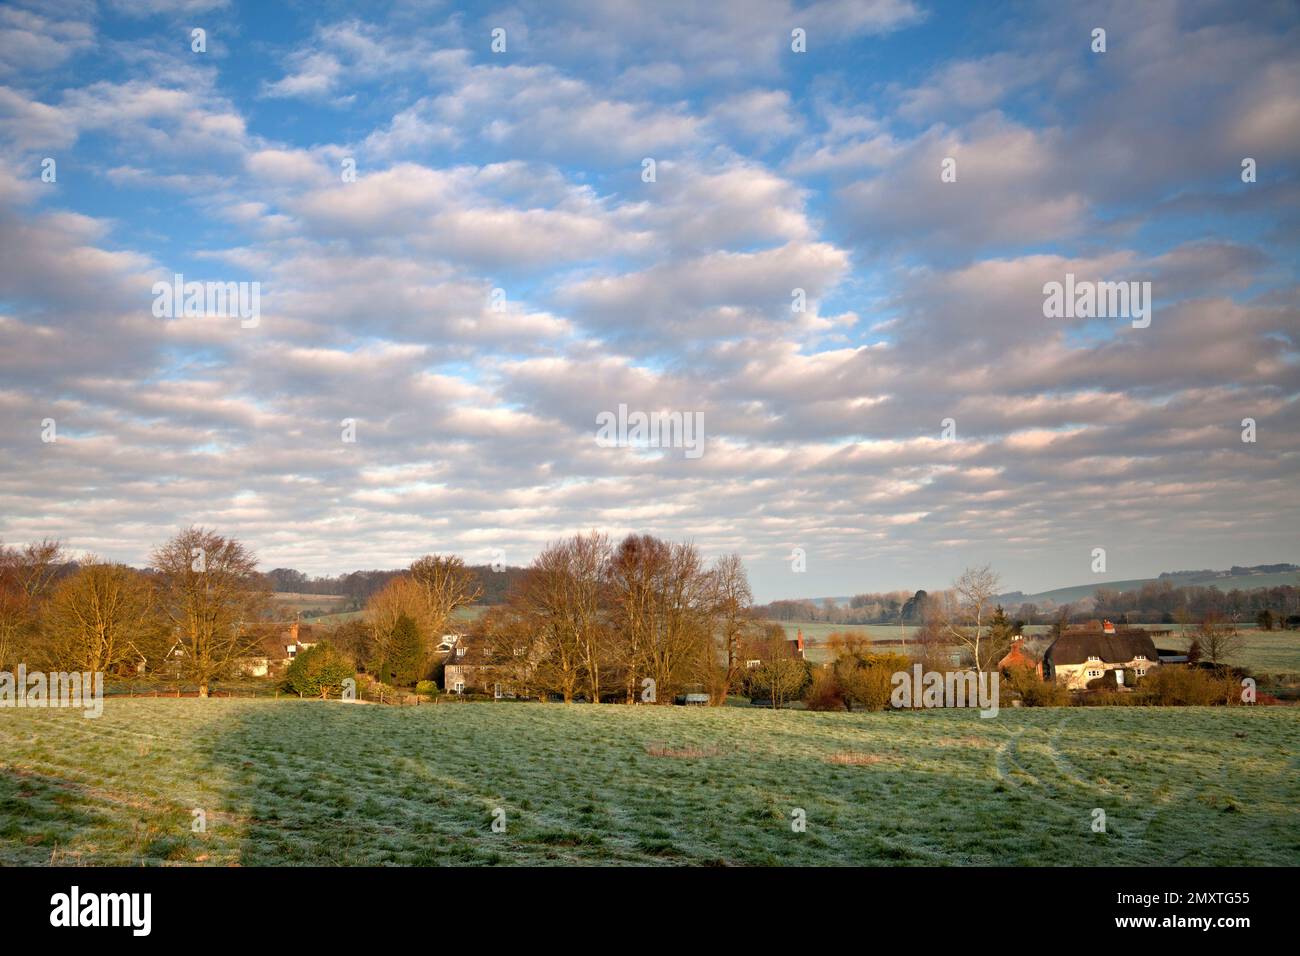 The small village of Sherrington in the Wylye Valley, Wiltshire. Stock Photo